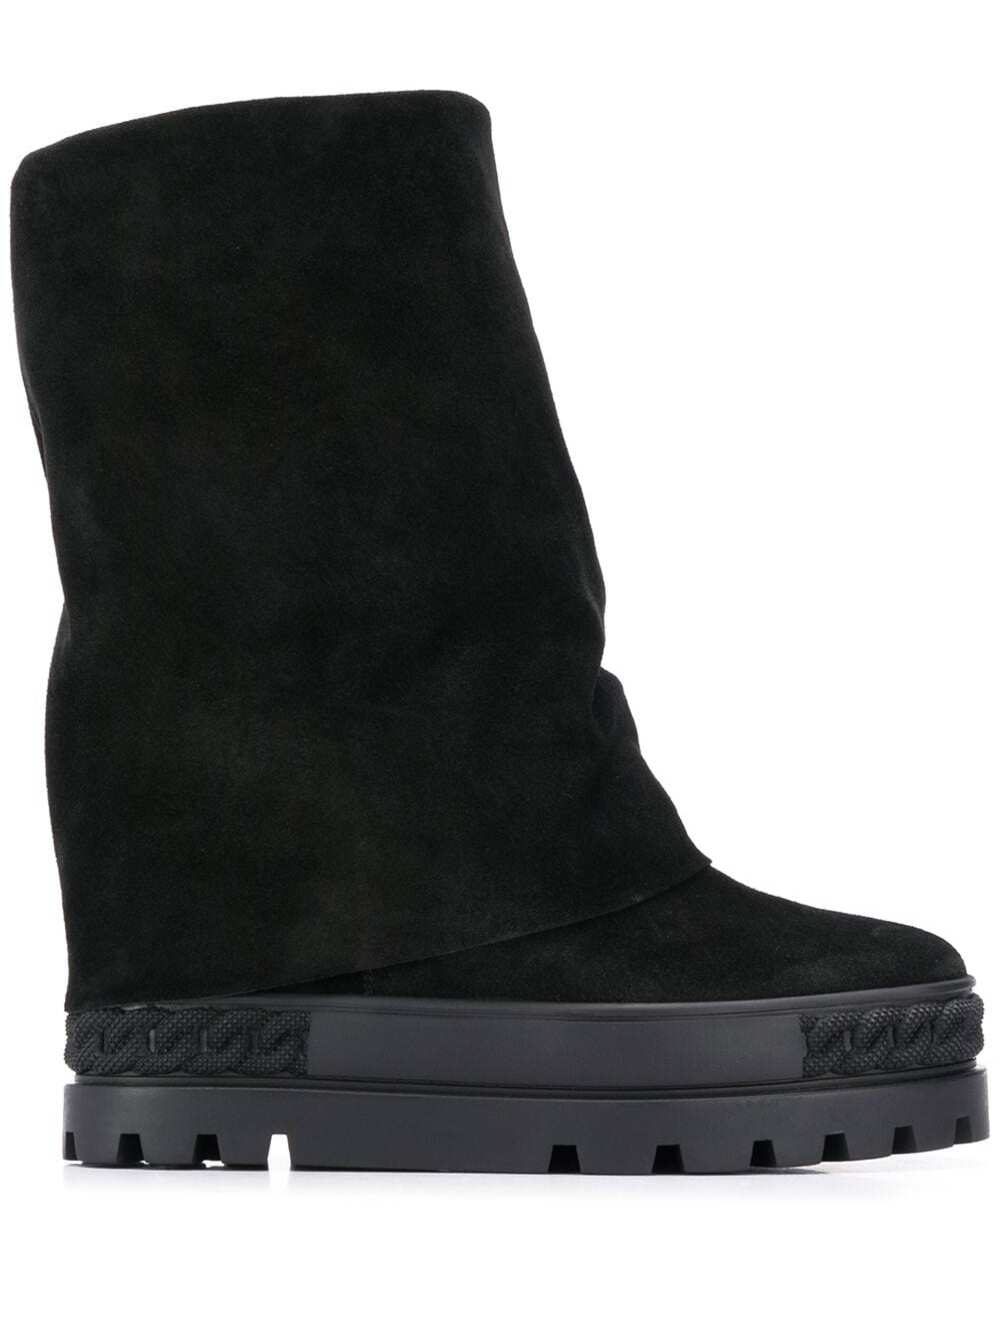 Black Suede Leather Boots Casadei Woman